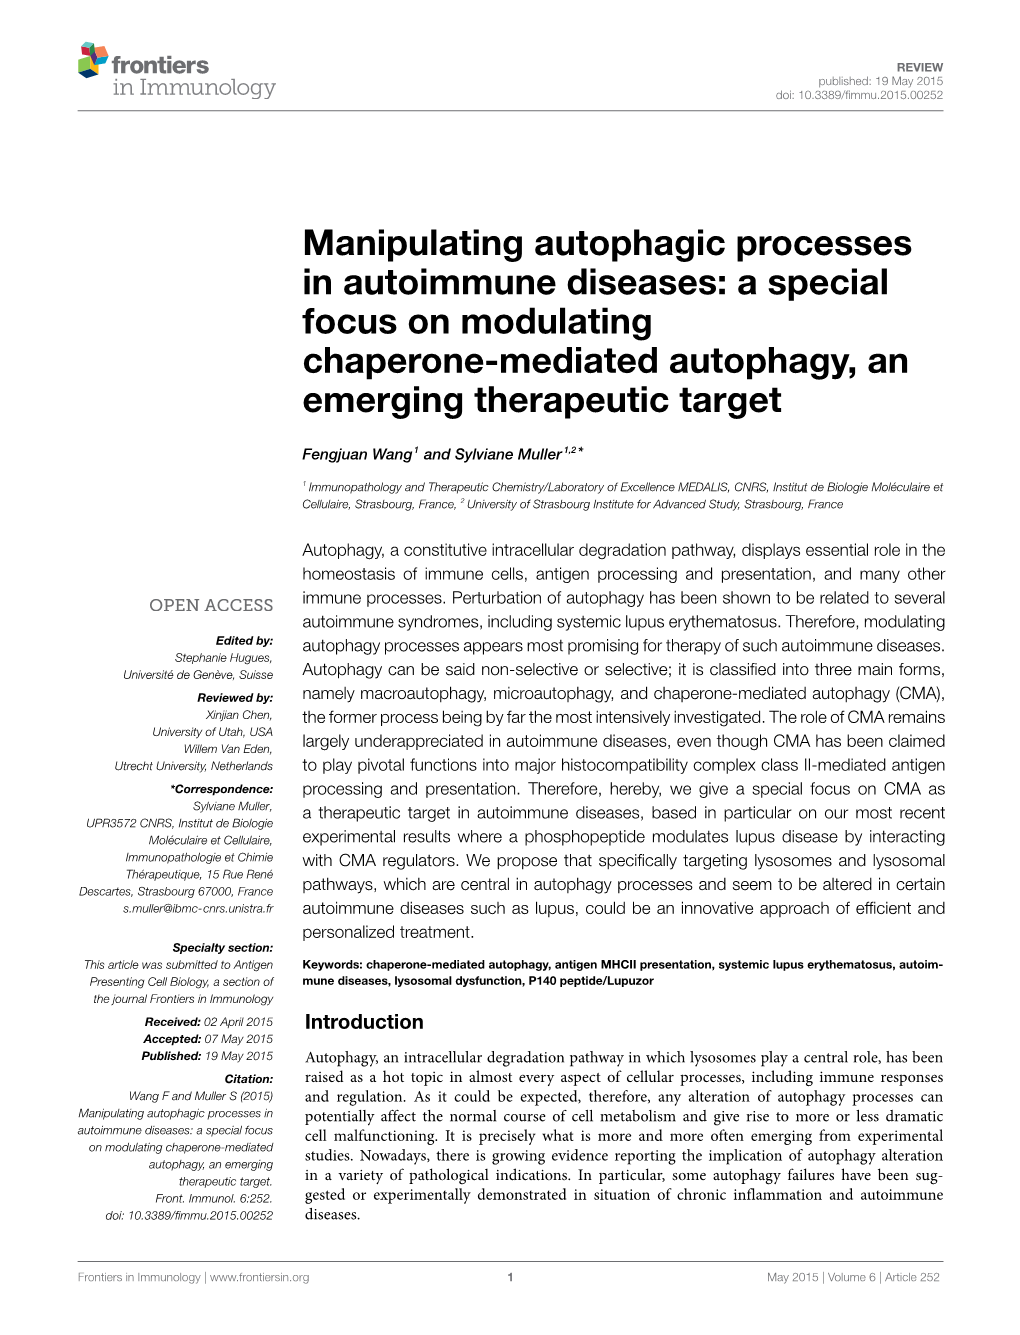 Manipulating Autophagic Processes in Autoimmune Diseases: a Special Focus on Modulating Chaperone-Mediated Autophagy, an Emerging Therapeutic Target